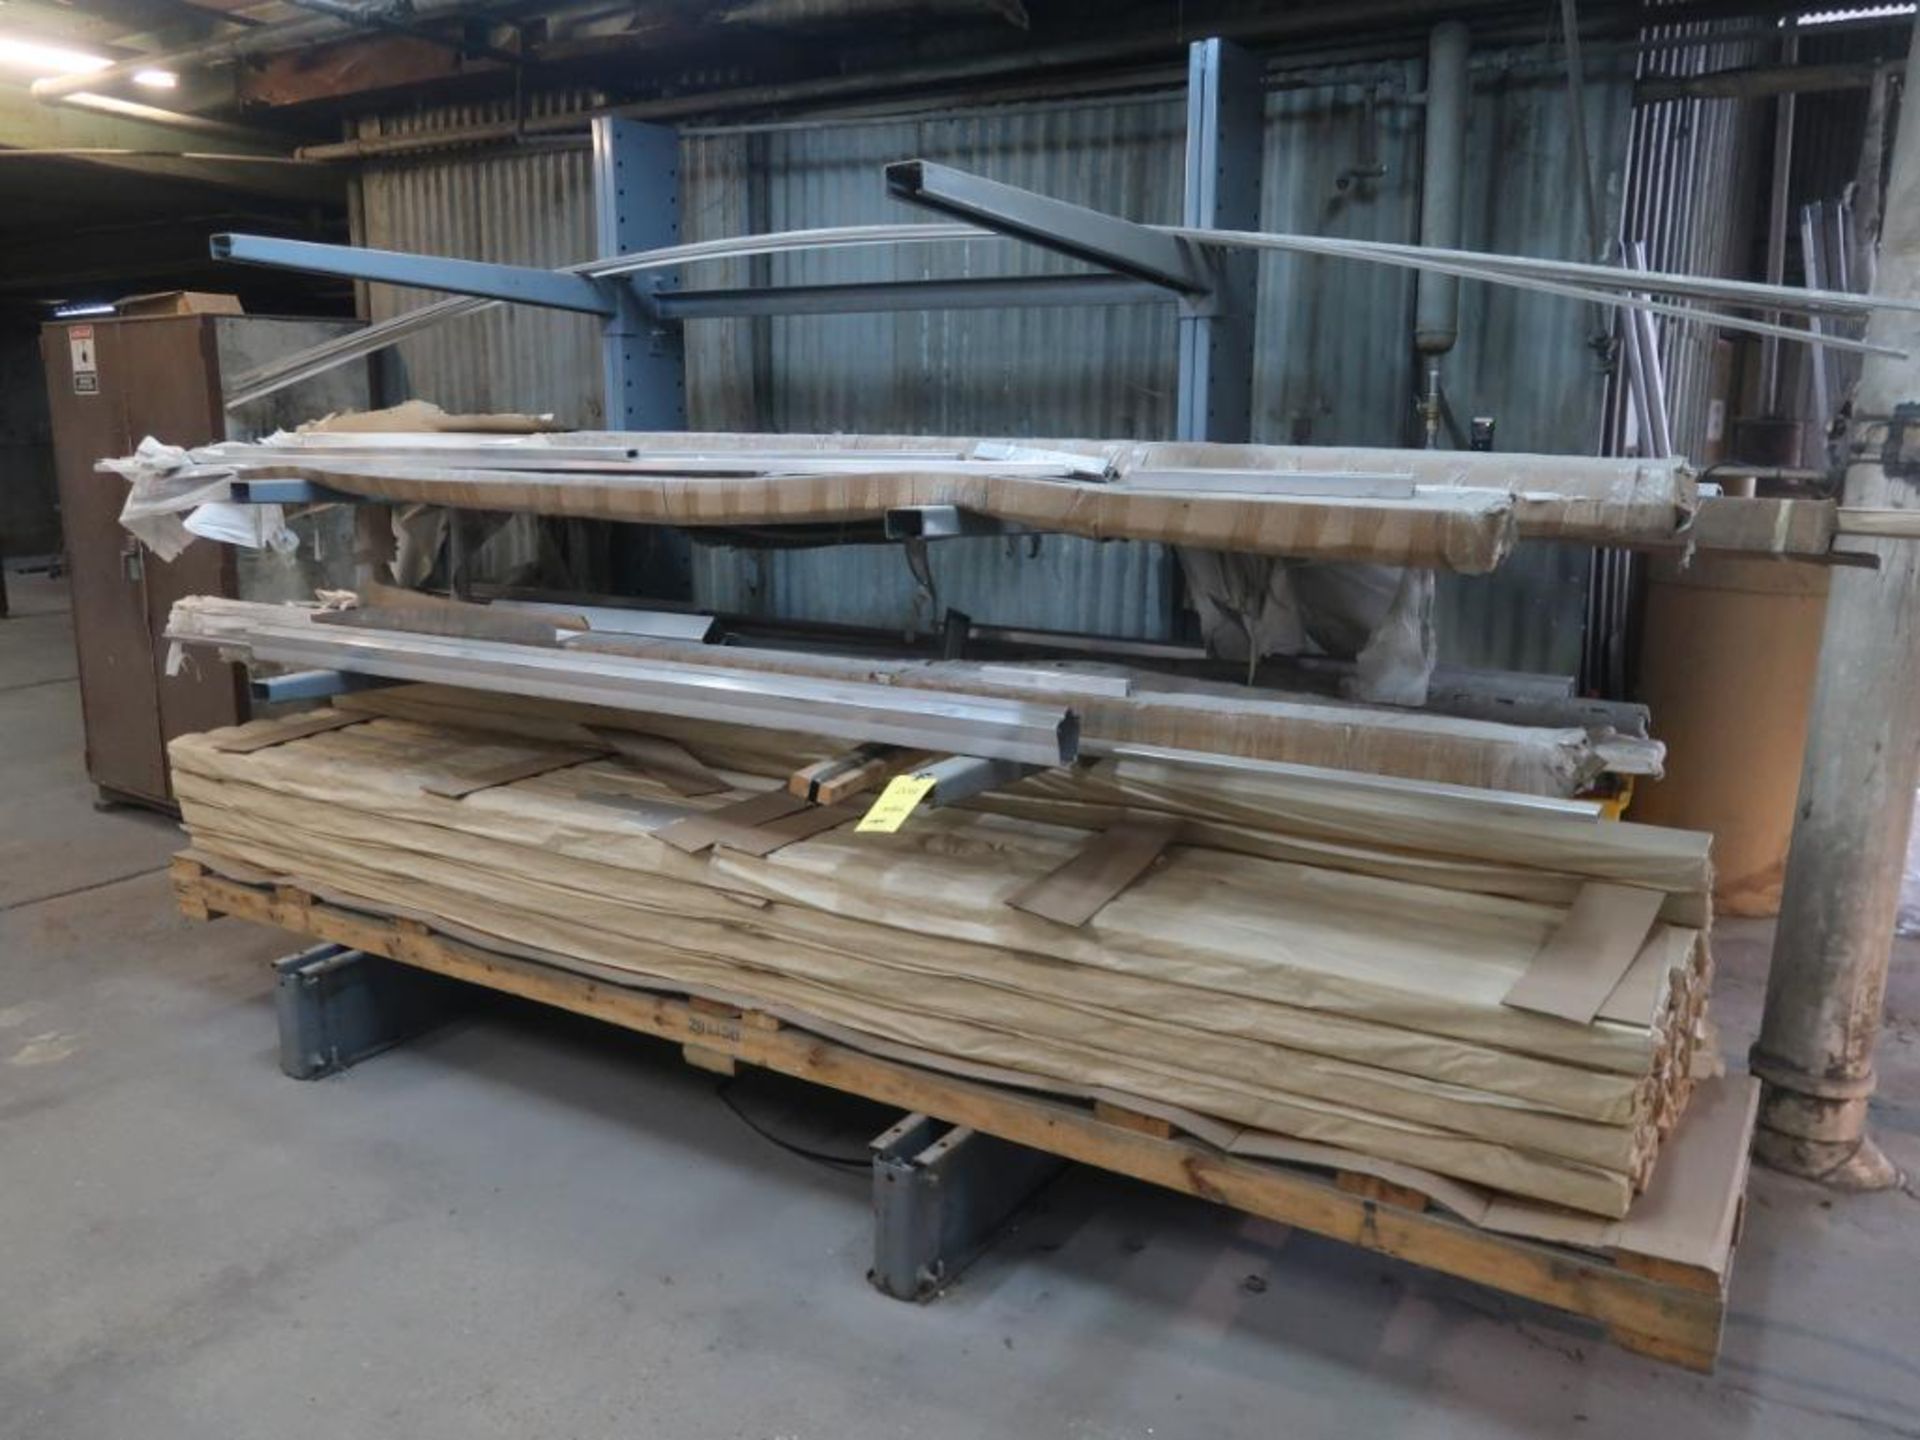 LOT: (1) Cantilever Rack with Aluminum Extrusions, (2) Steel Racks with Steel, Large Quantity